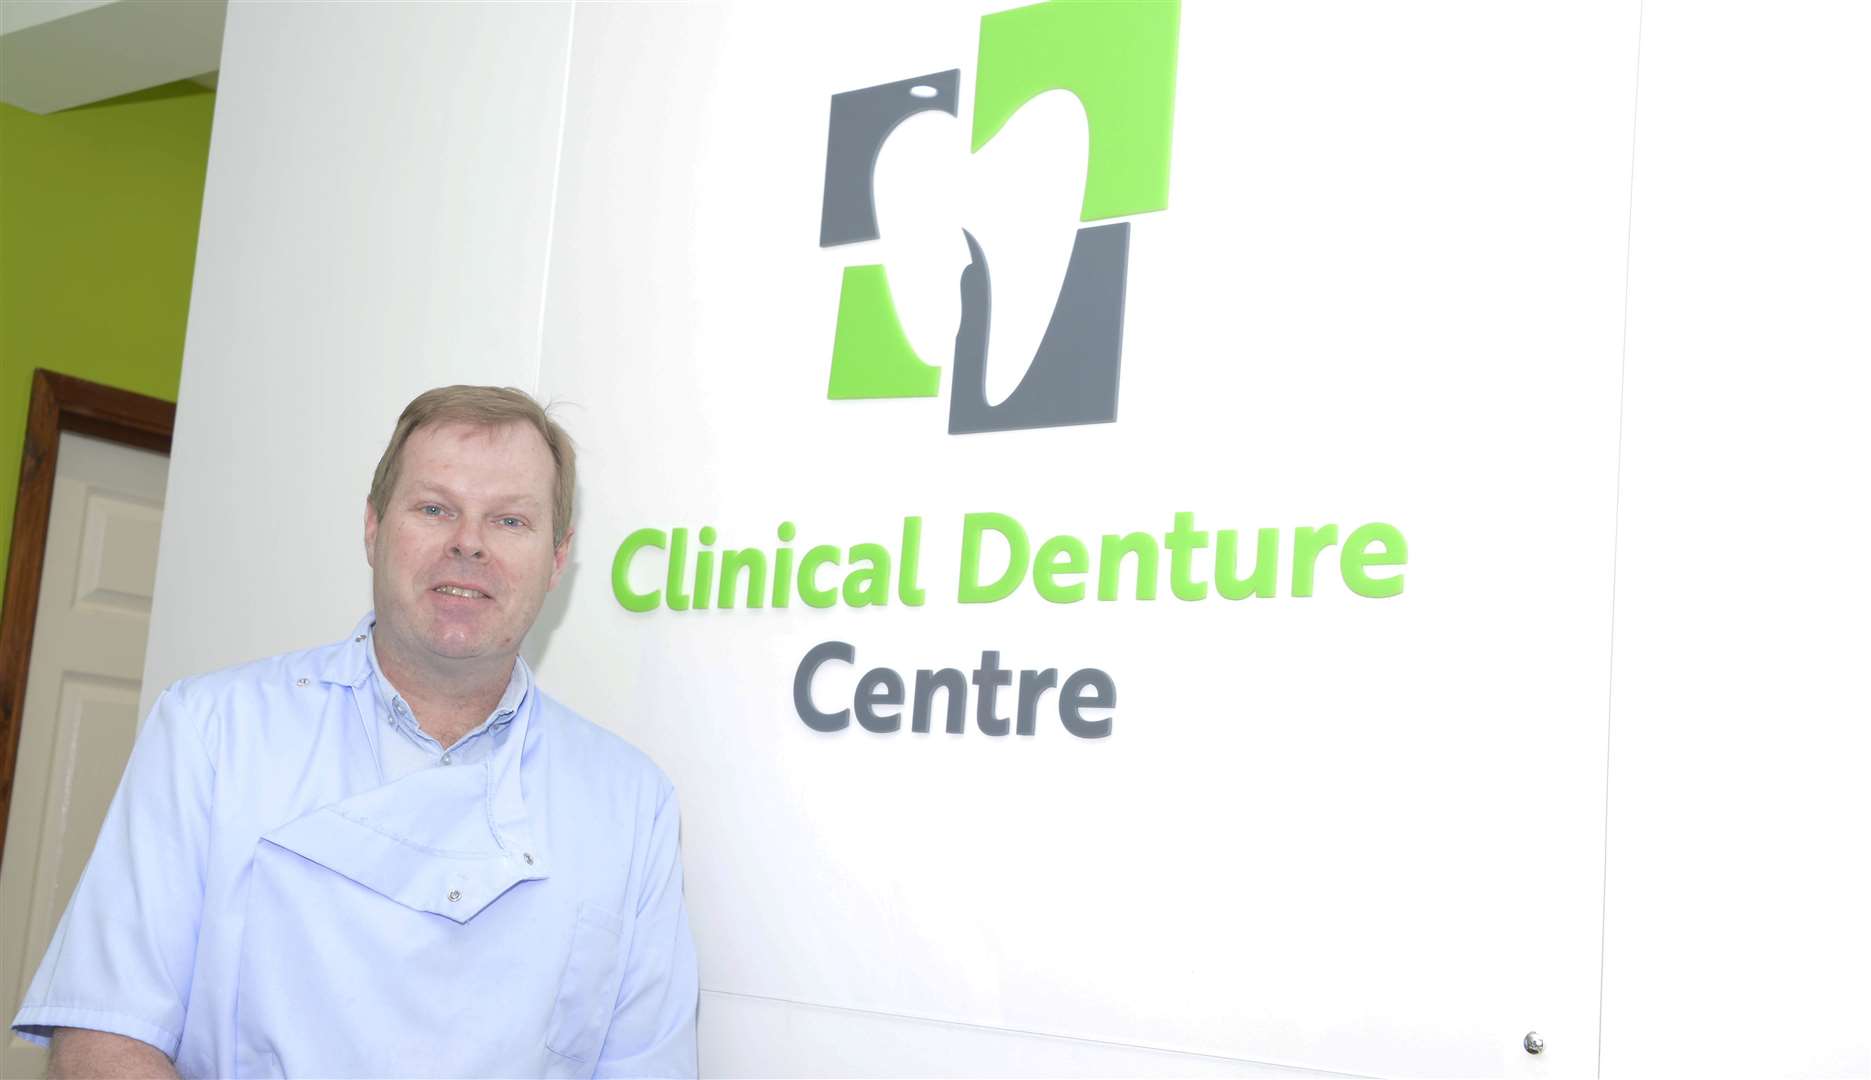 Clinical Denture Centre is a local practice owned by Peter Price. Picture: Paul Amos